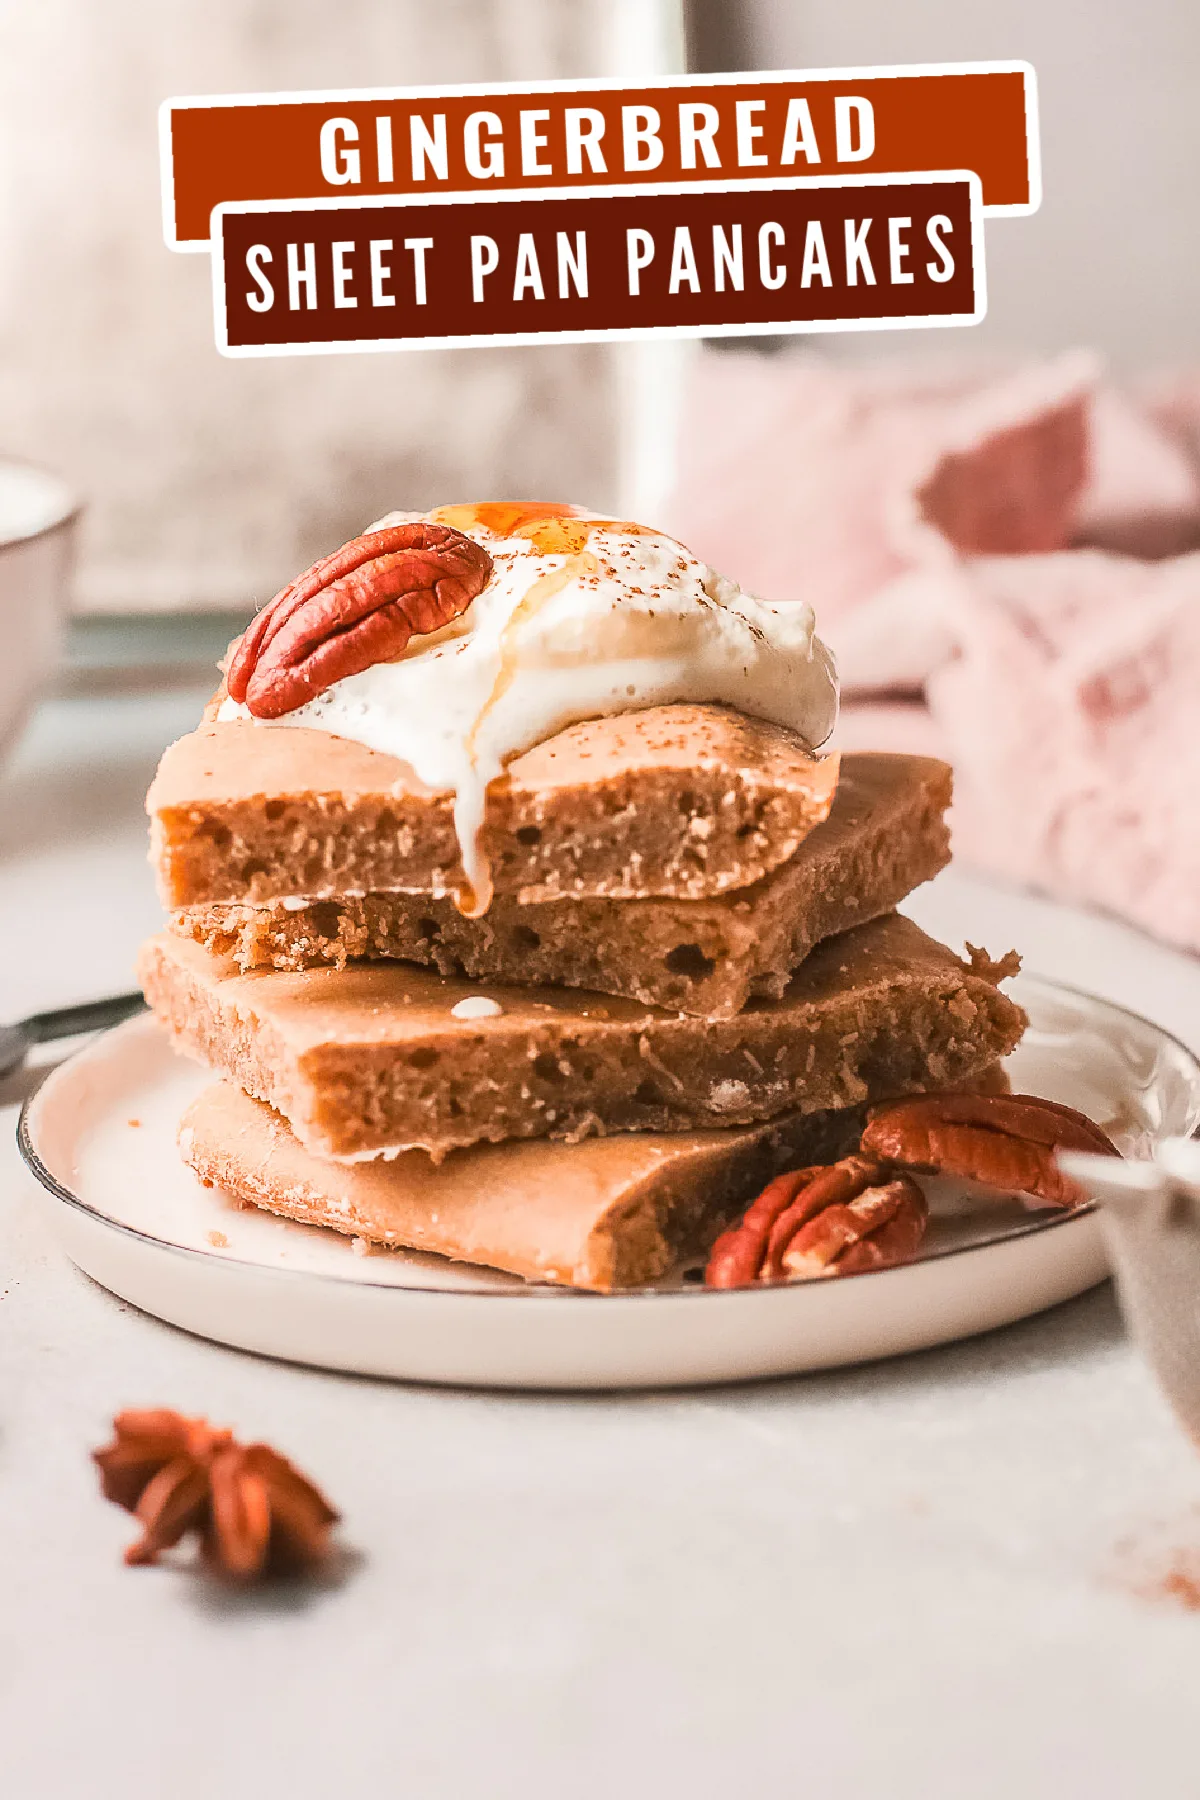 This delicious Gingerbread Sheet Pan Pancakes recipe is the perfect Christmas breakfast for a crowd! It's easy to make and tastes AMAZING.